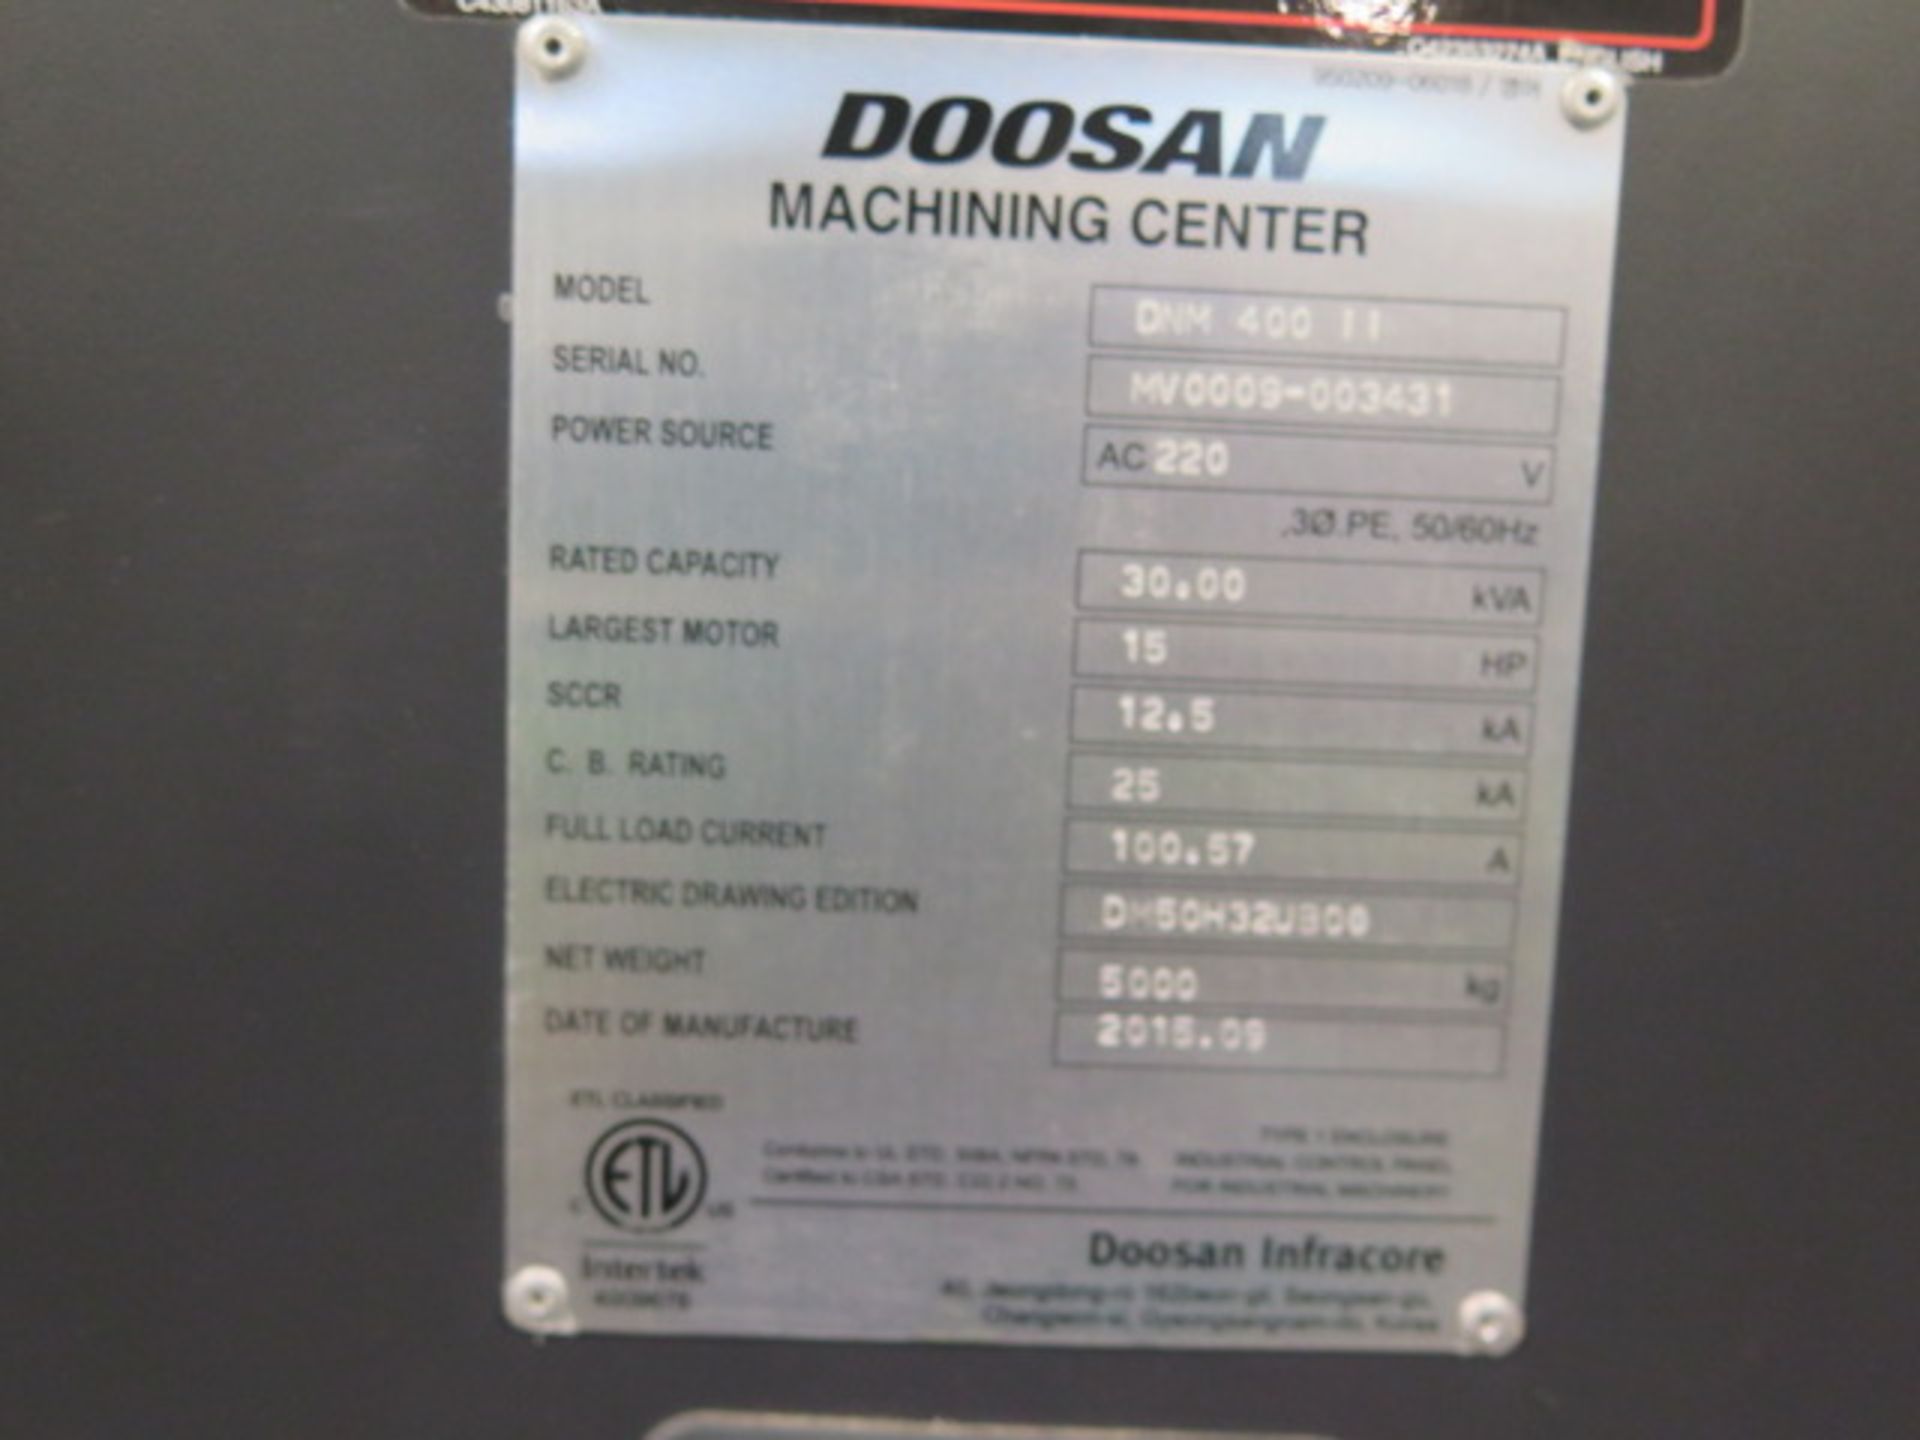 2015 Doosan DNM400 II 5-Axis Capable CNC Vertical Machining Center s/n MV0009-00343, SOLD AS IS - Image 22 of 22